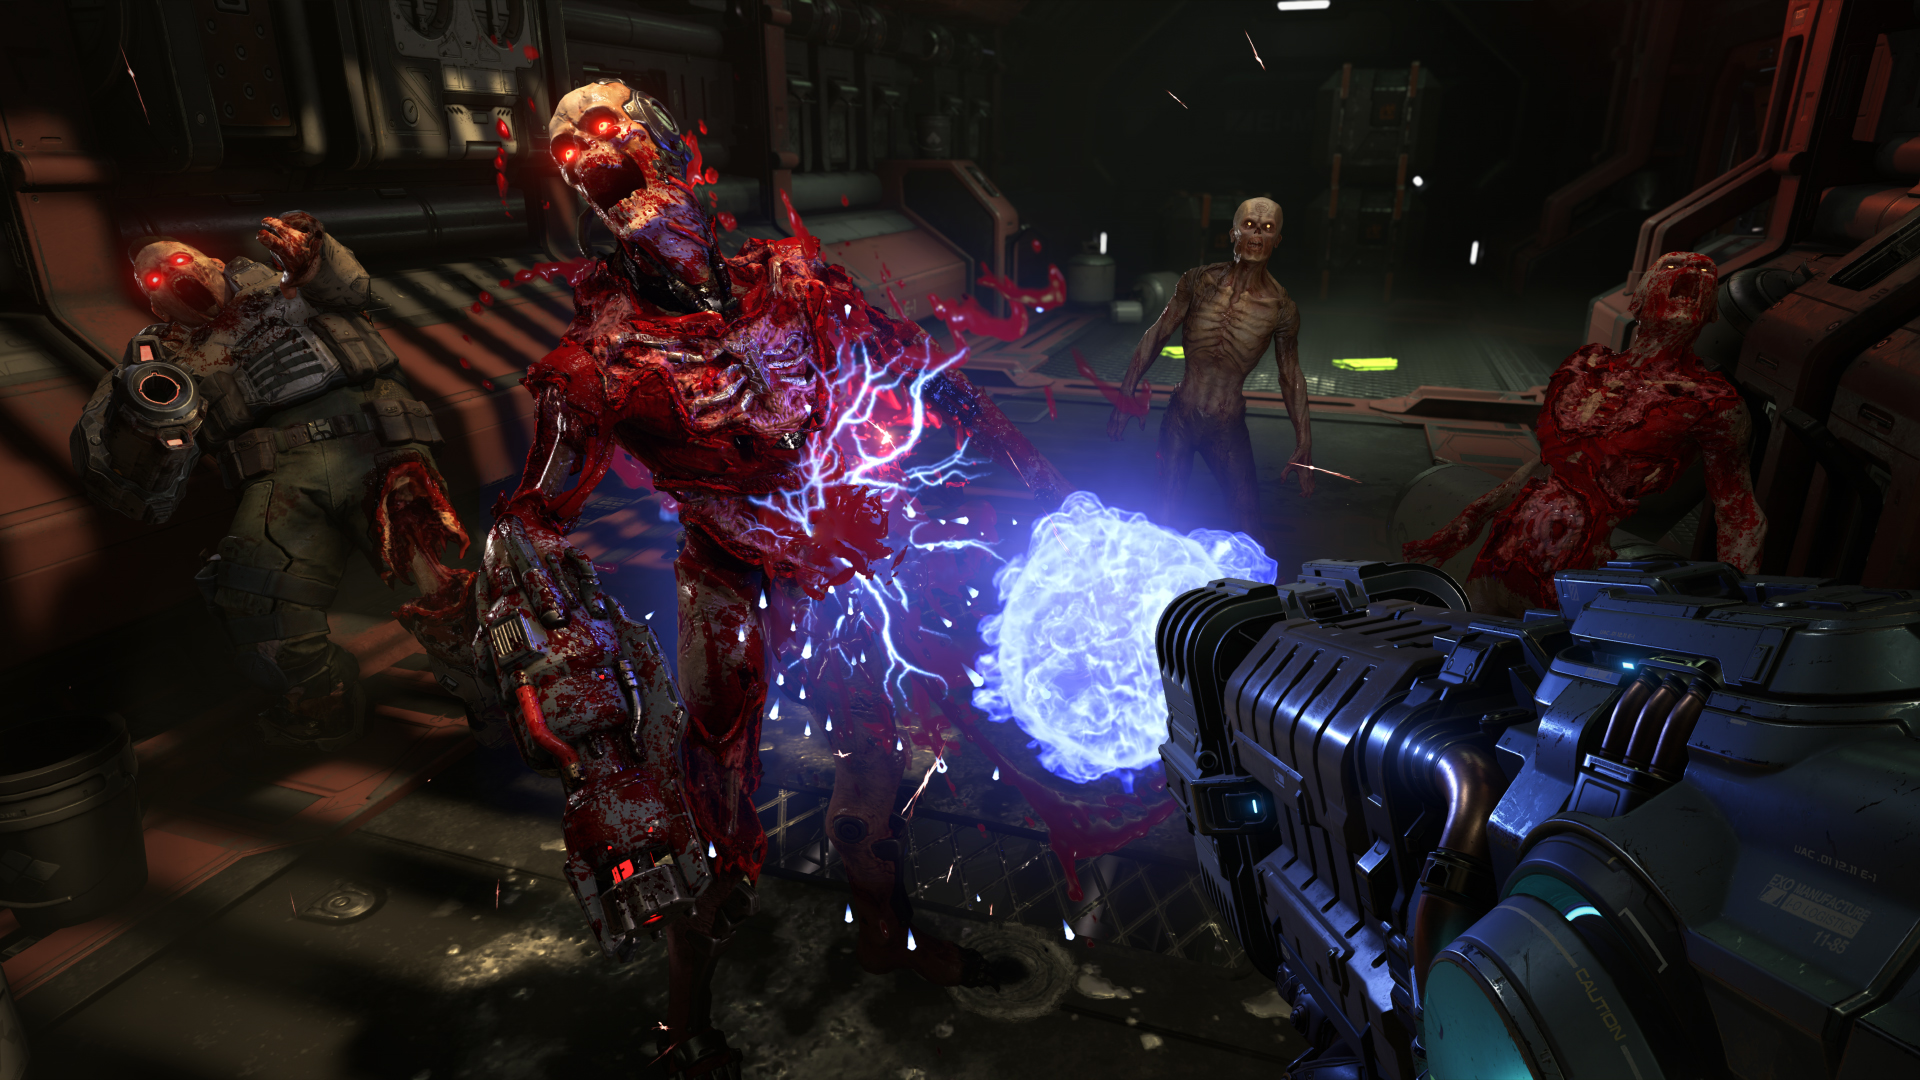 Check out these gloriously gory Doom Eternal screenshots